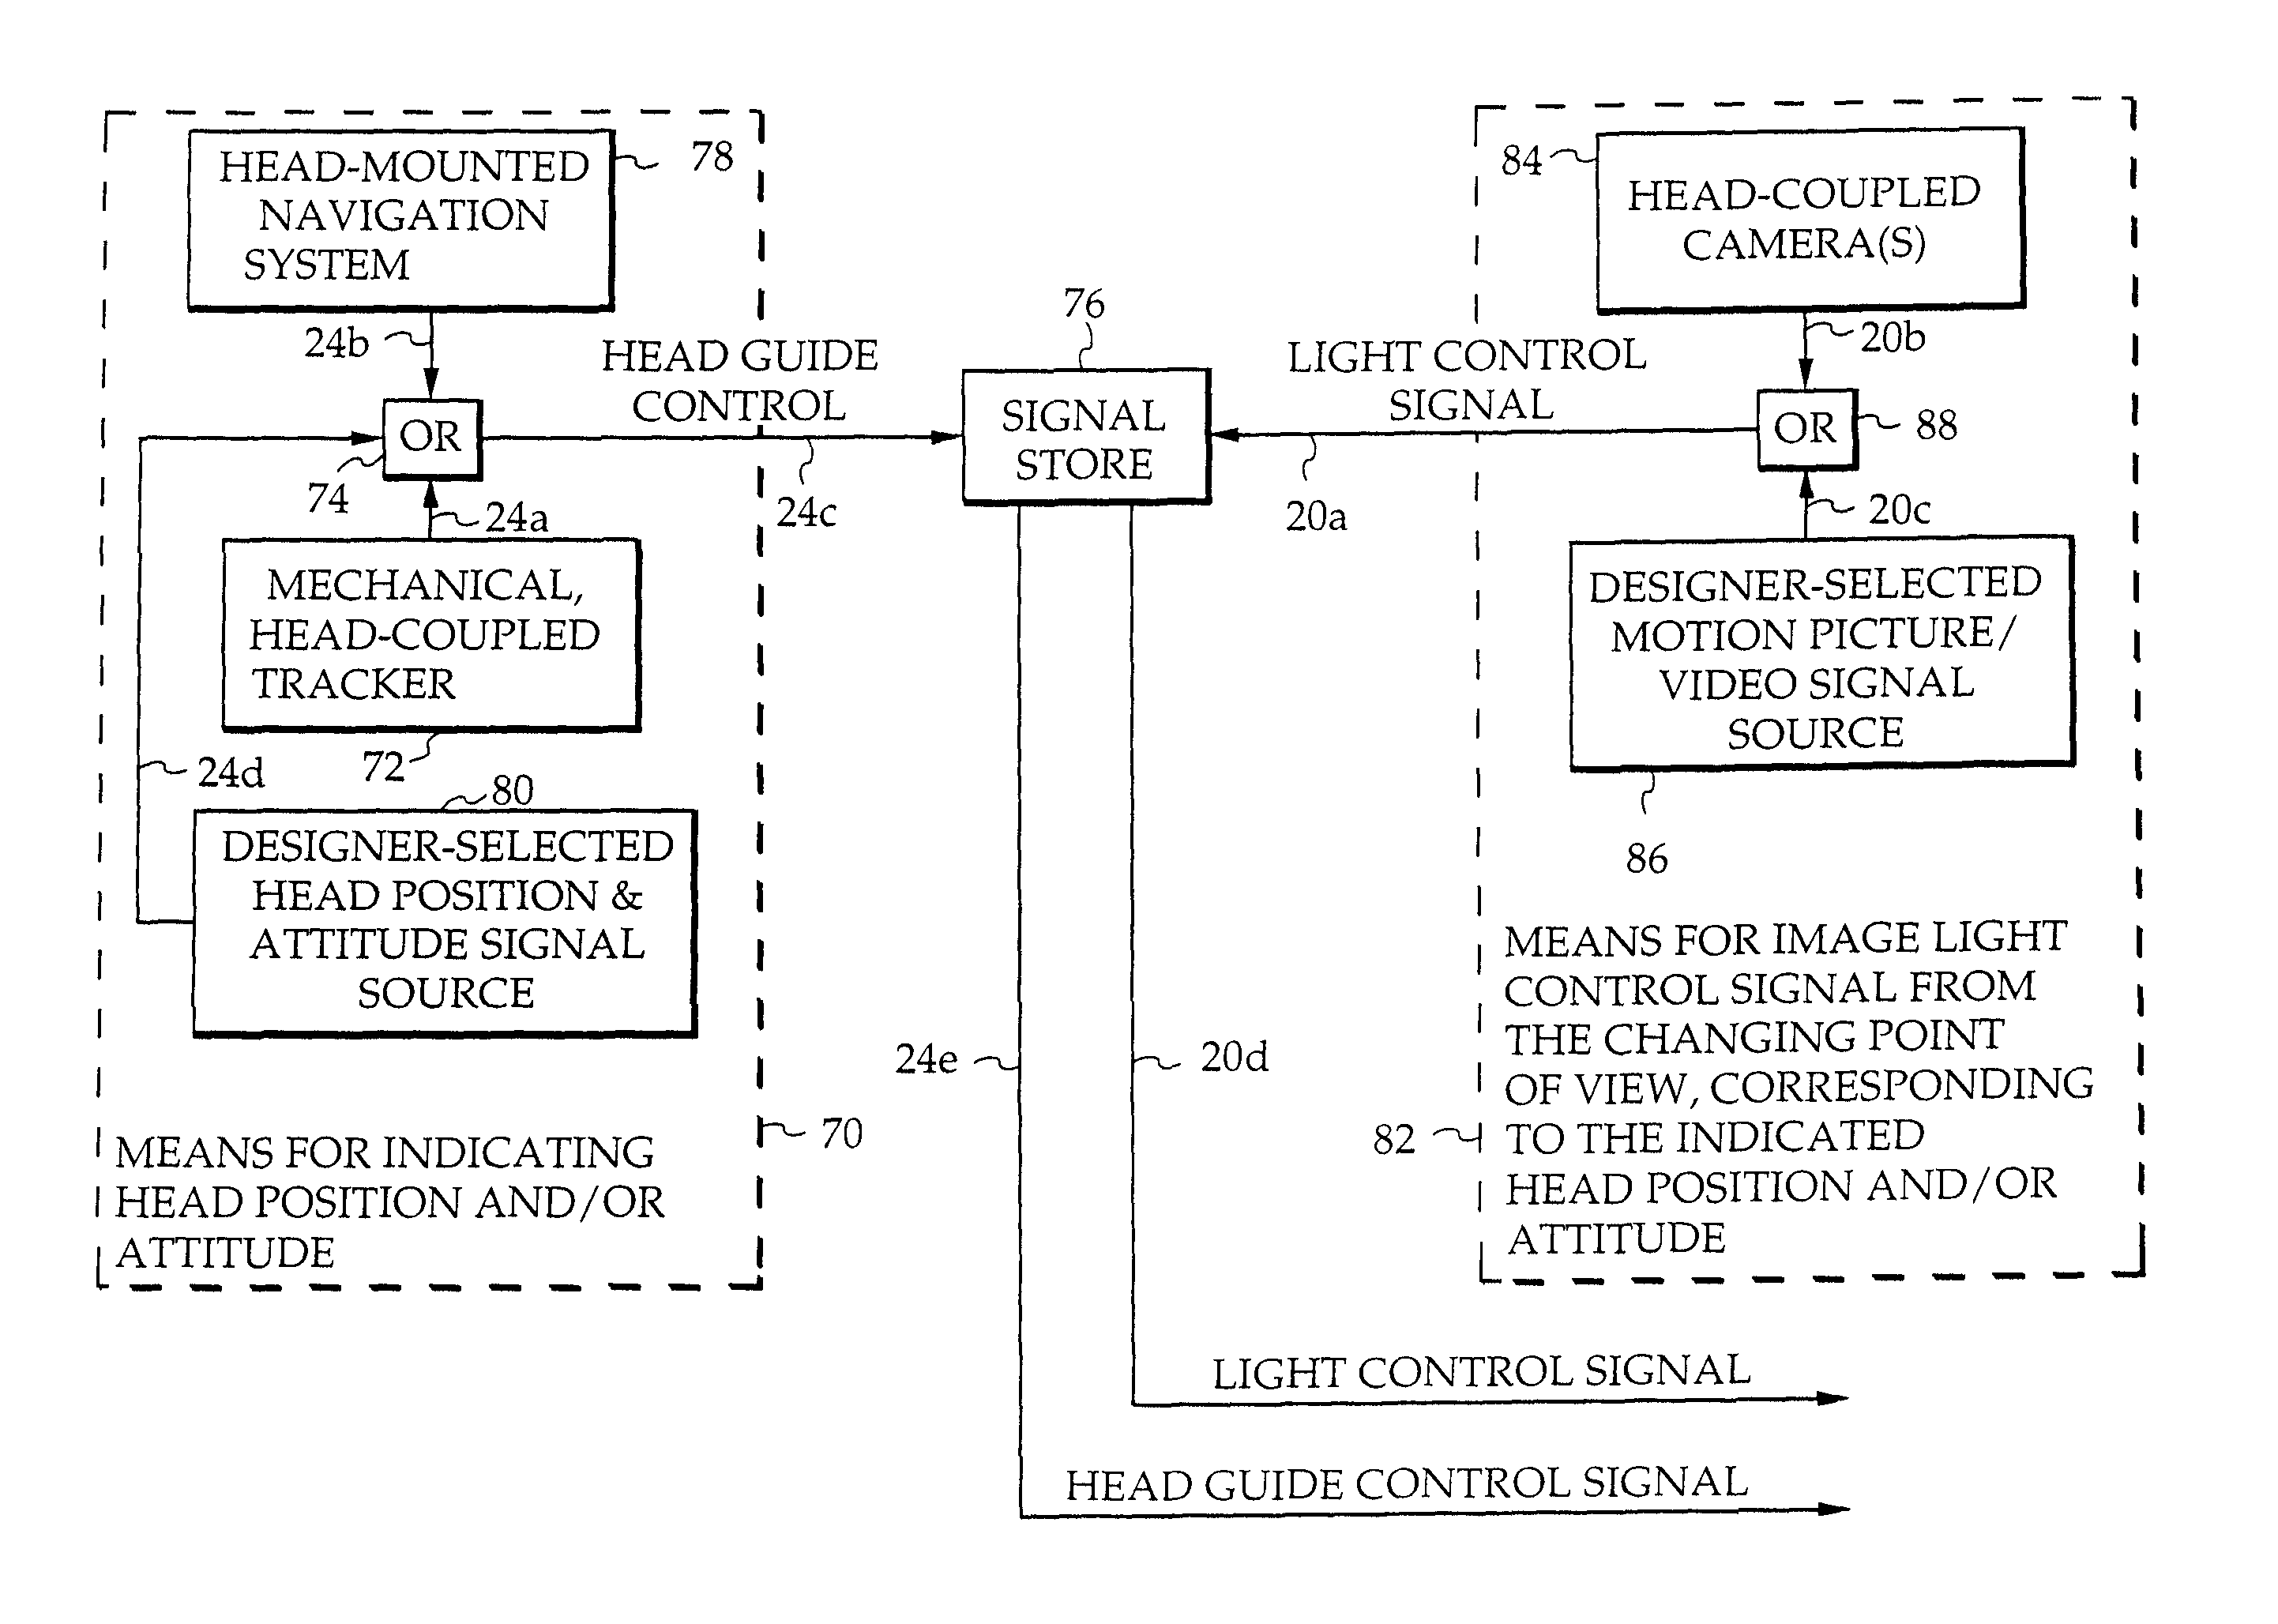 Method and apparatus for producing and storing, on a resultant non-transitory storage medium, computer generated (CG) video in correspondence with images acquired by an image acquisition device tracked in motion with respect to a 3D reference frame